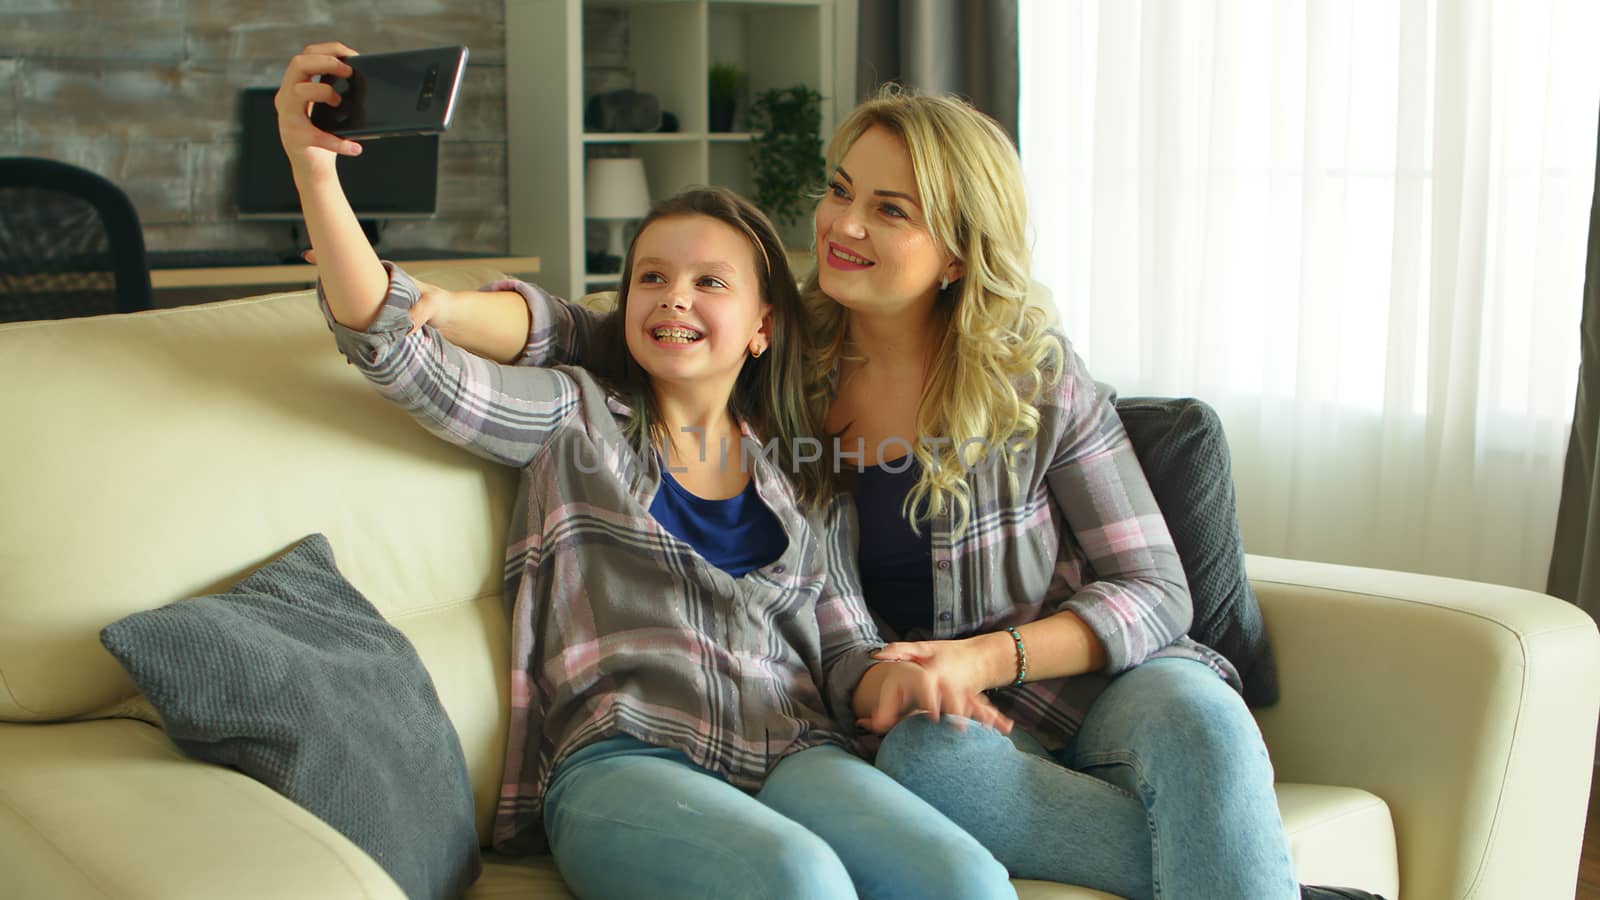 Mother and daughter making funny faces while taking a selfie sitting on the couch in living room.